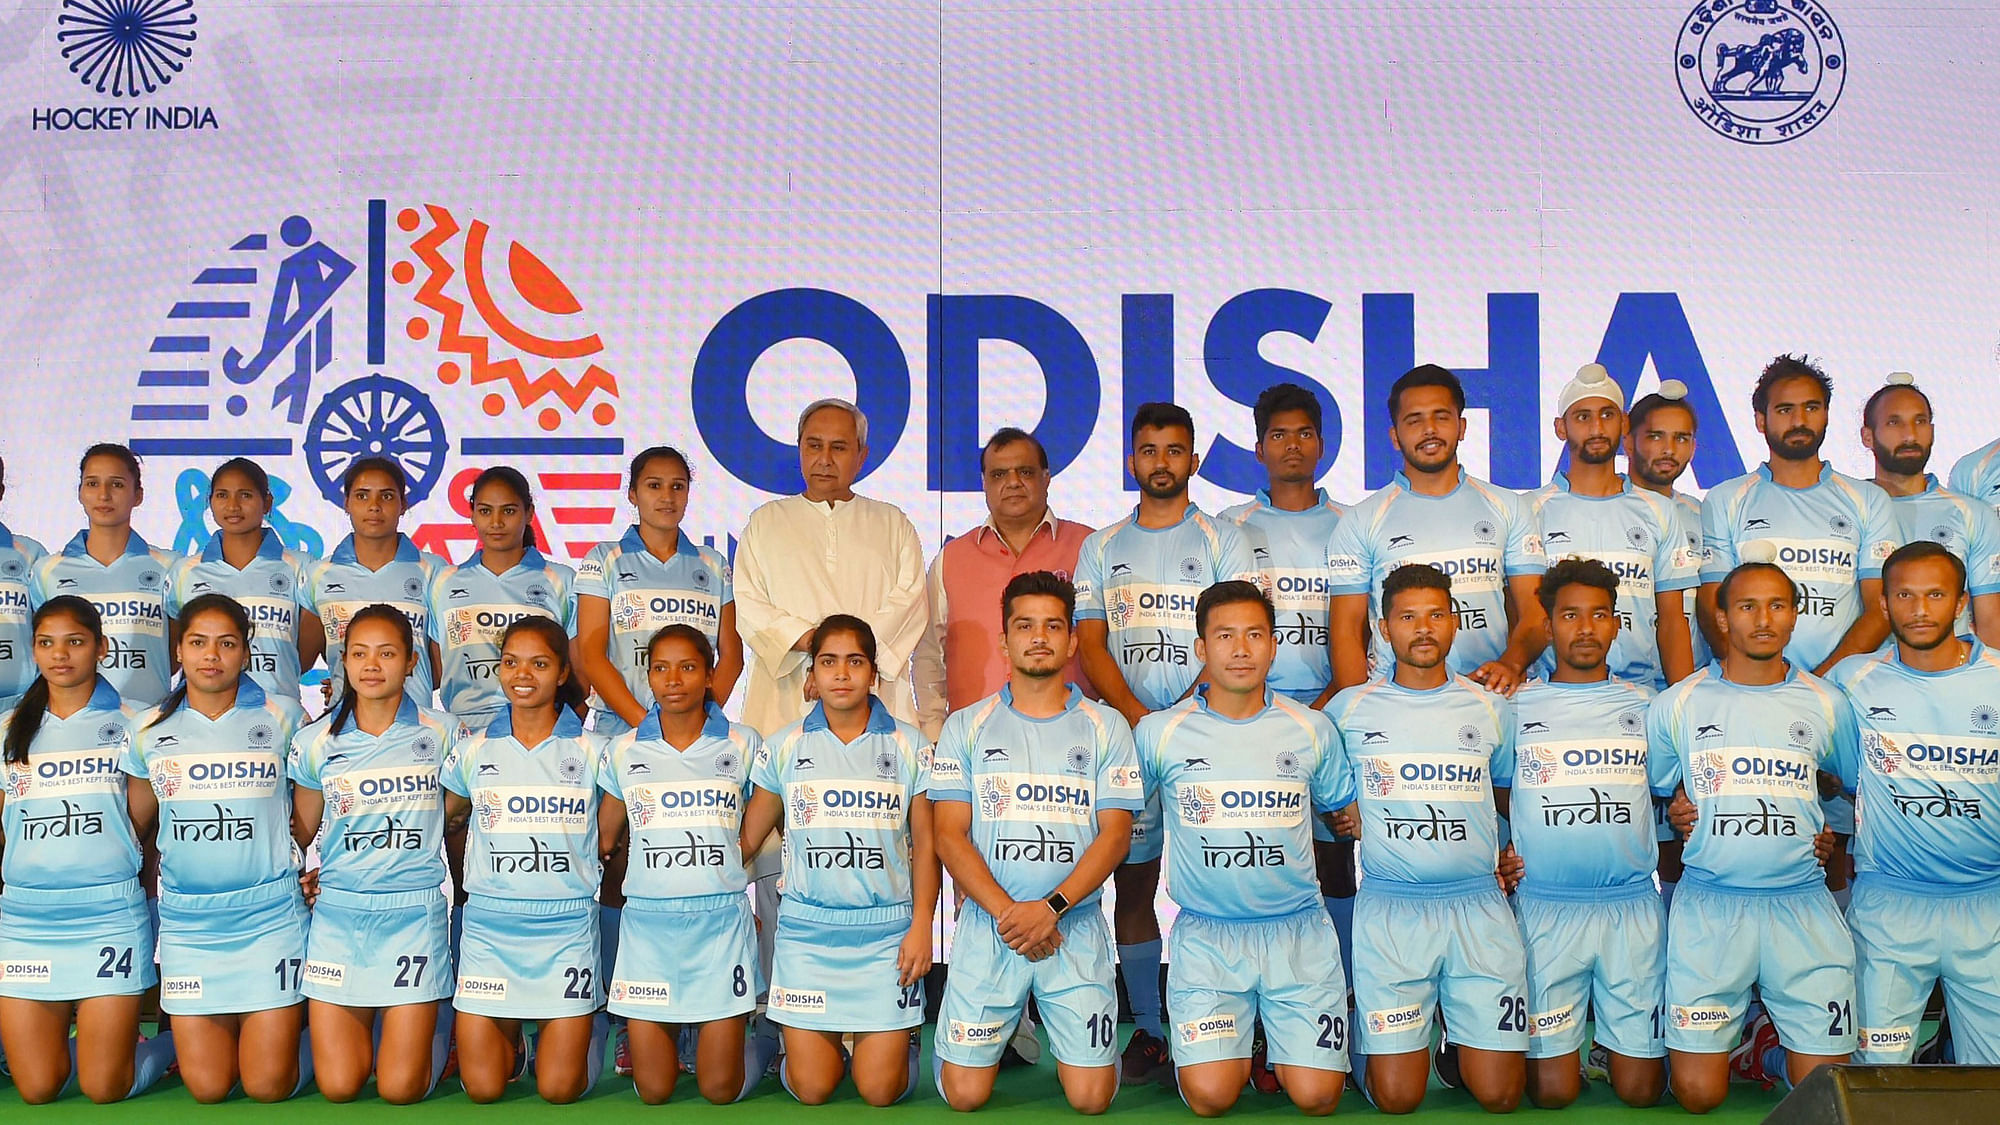 Hockey India announced a first-of-its-kind association with the state government of Odisha.